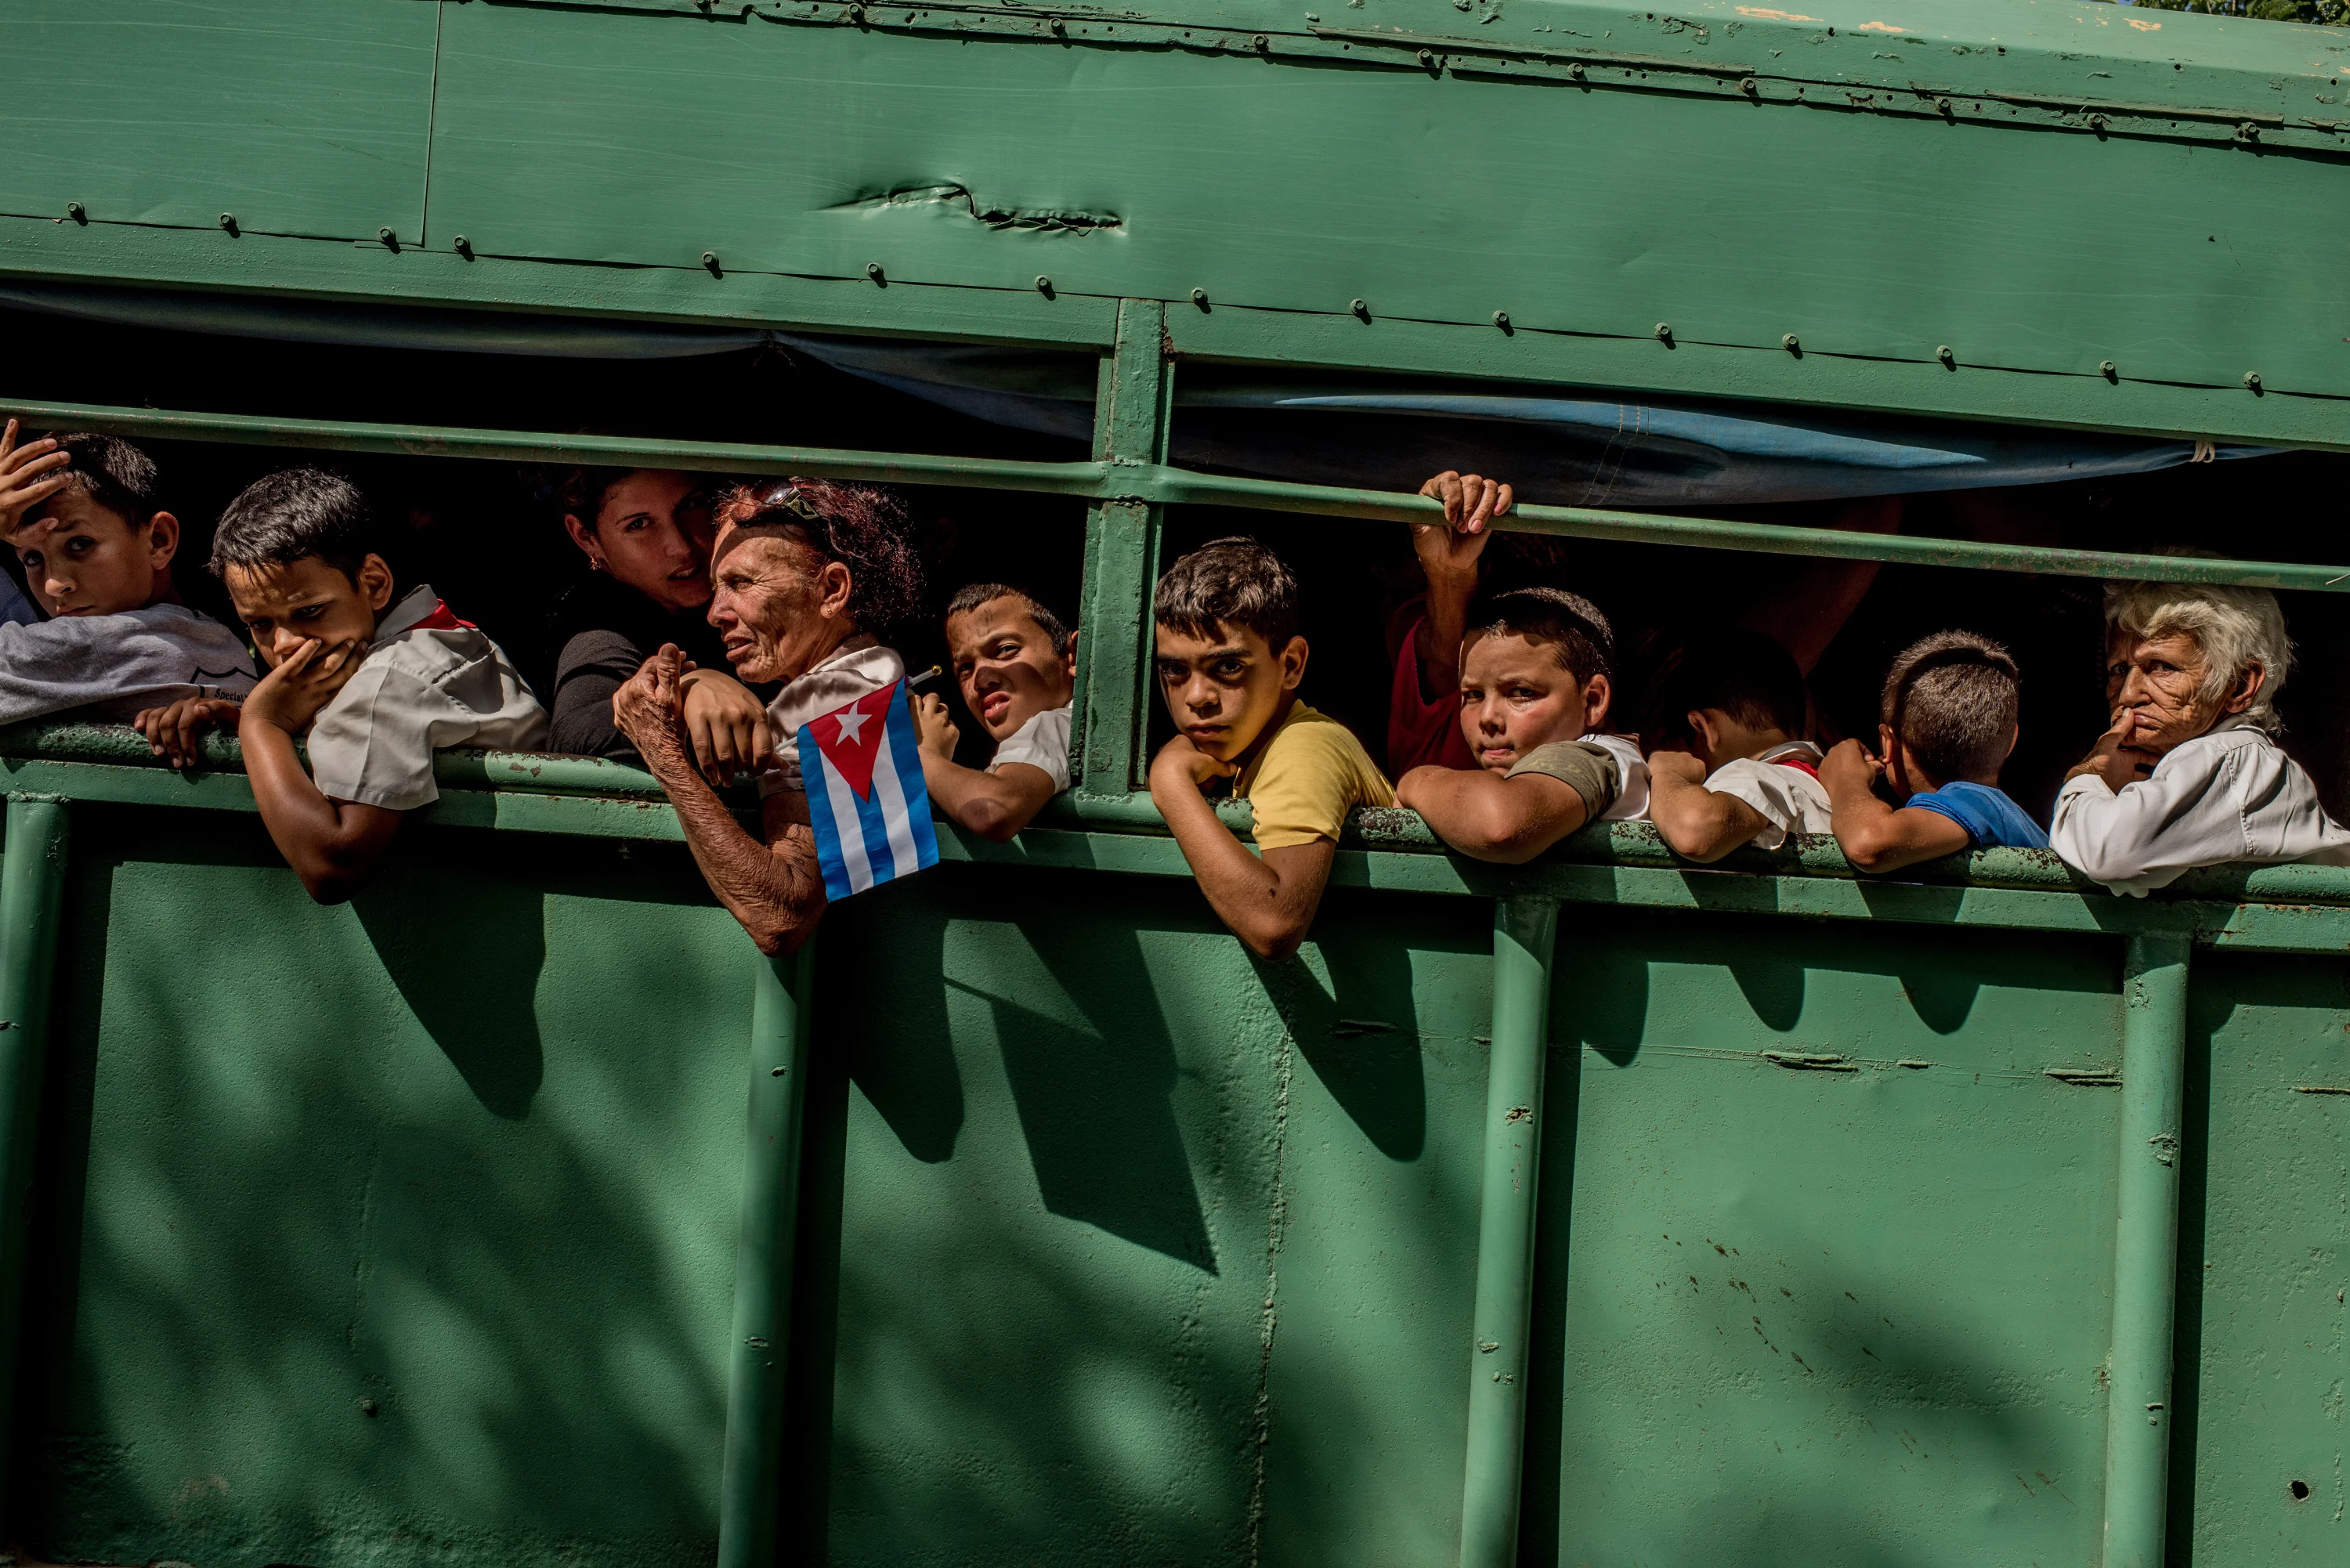 Trucks carried students home after the carriage carrying Fidel’s ashes passed in Las Tunas Province, Cuba on December 2, 2016.